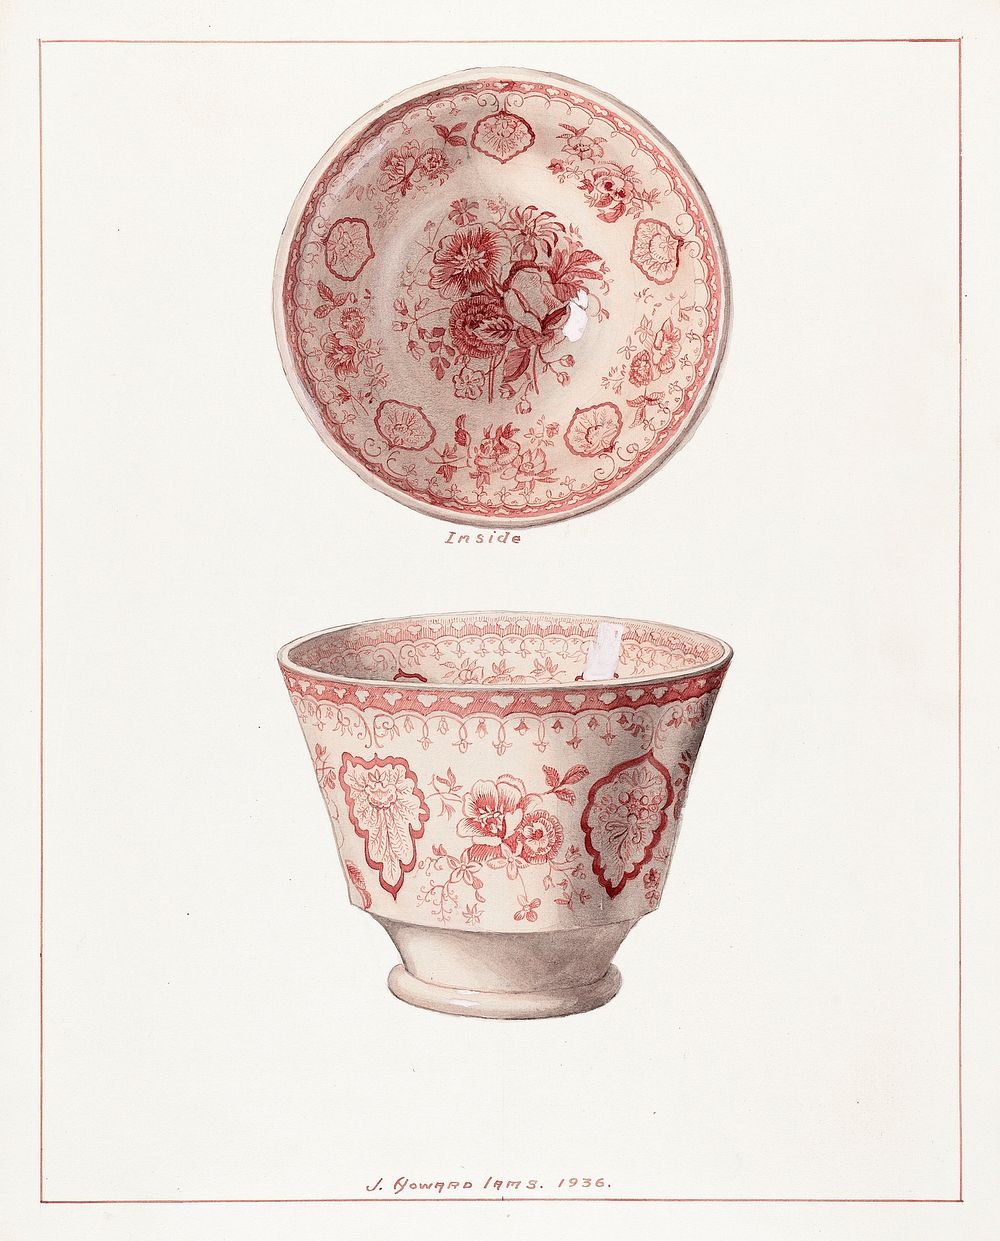 Cup (ca.1936) by J. Howard Iams. Original from The National Gallery of Art. Digitally enhanced by rawpixel.